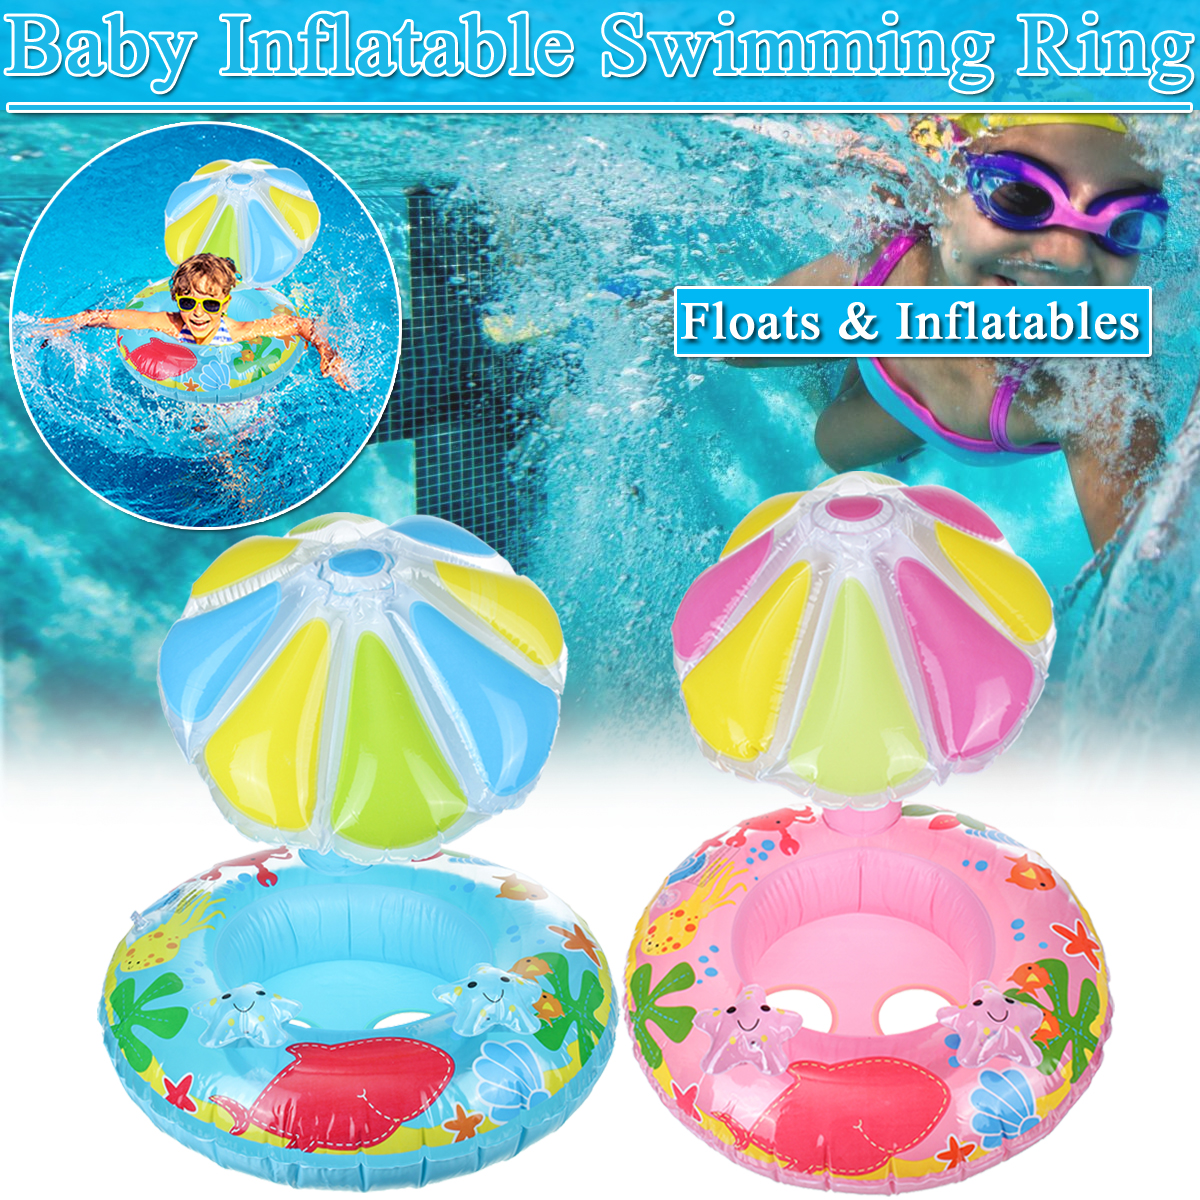 Baby-Swimming-Sun-Shade-Float-Seat-Boat-Inflatable-Kids-Water-Swimming-Ring-Aid-Toys-1682293-1